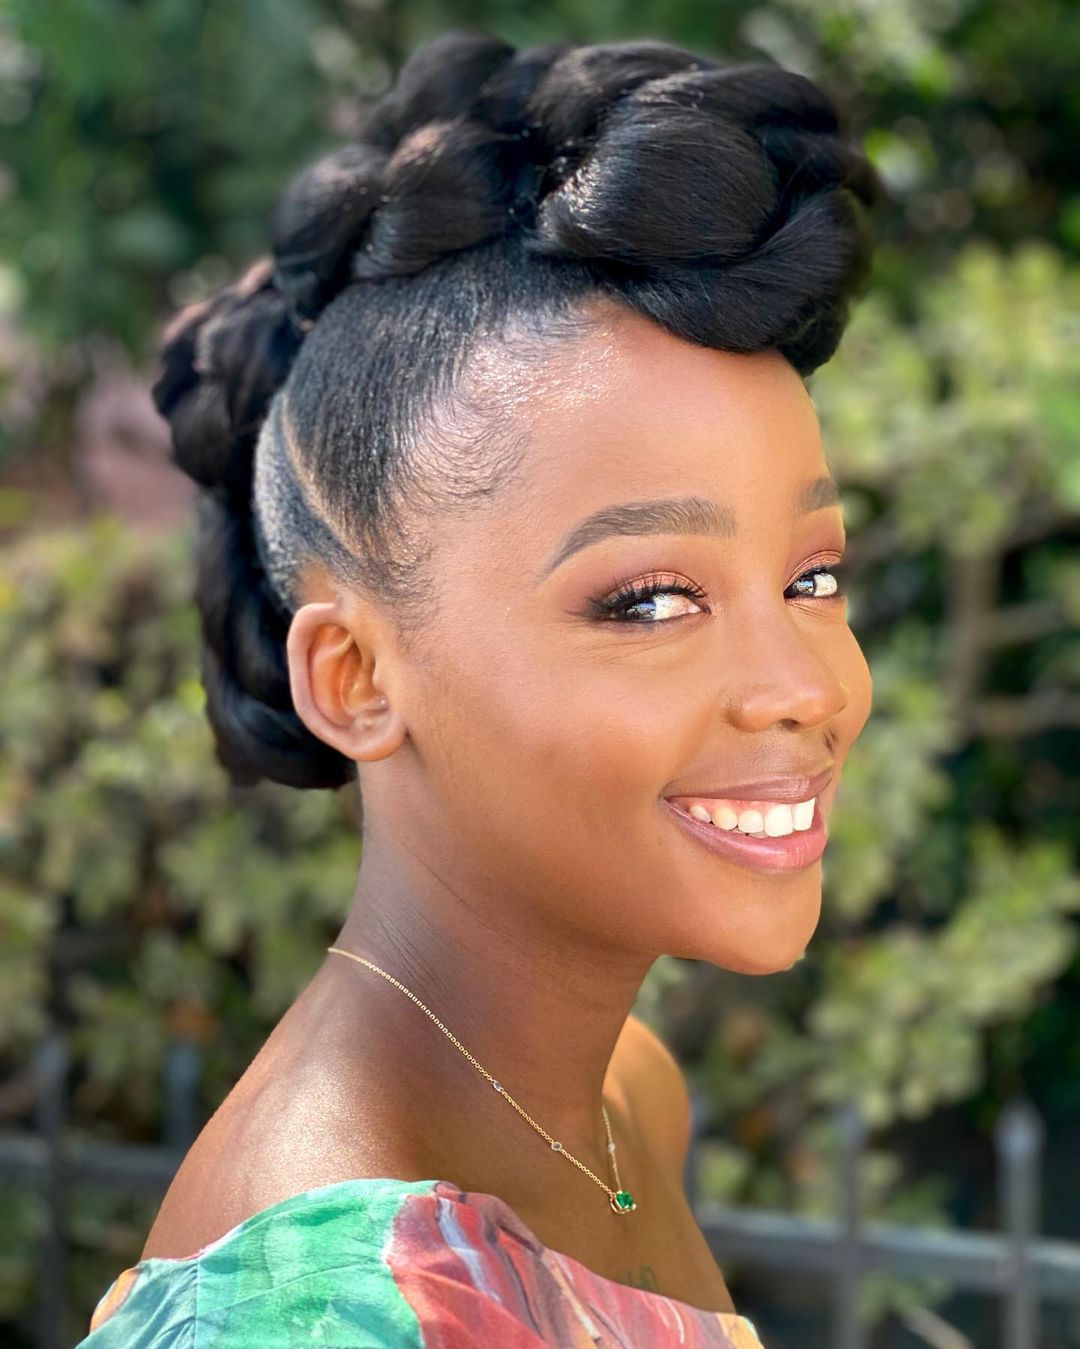 Thuso Mbedu bags award at GQ South Africa